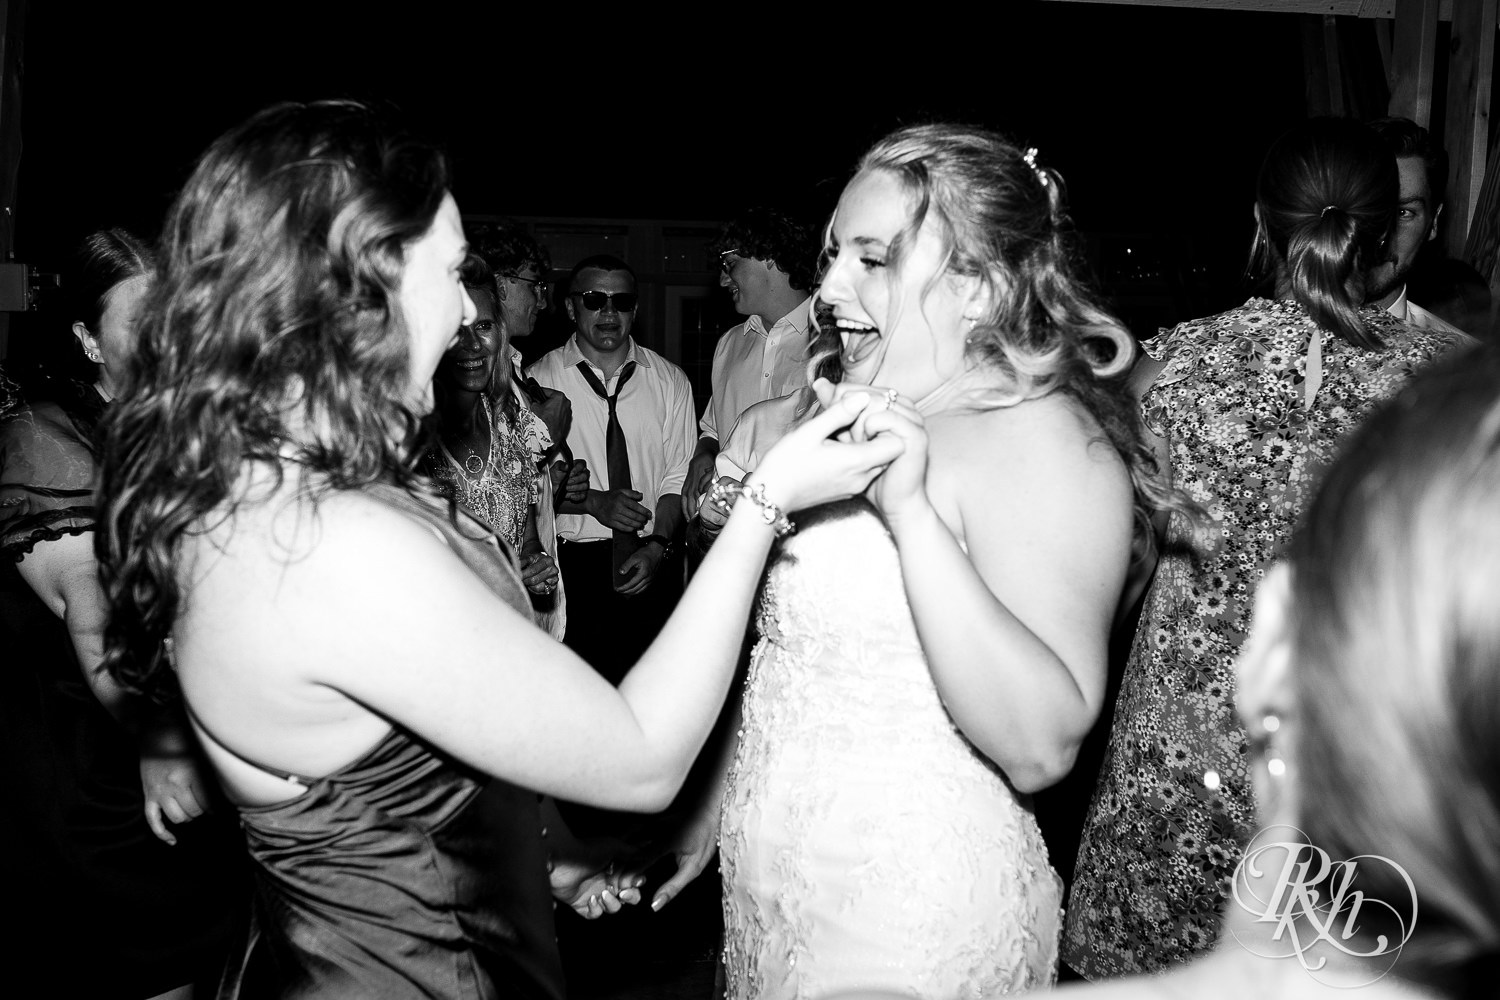 Guests dance with bride during wedding reception at Cottage Farmhouse in Glencoe, Minnesota.